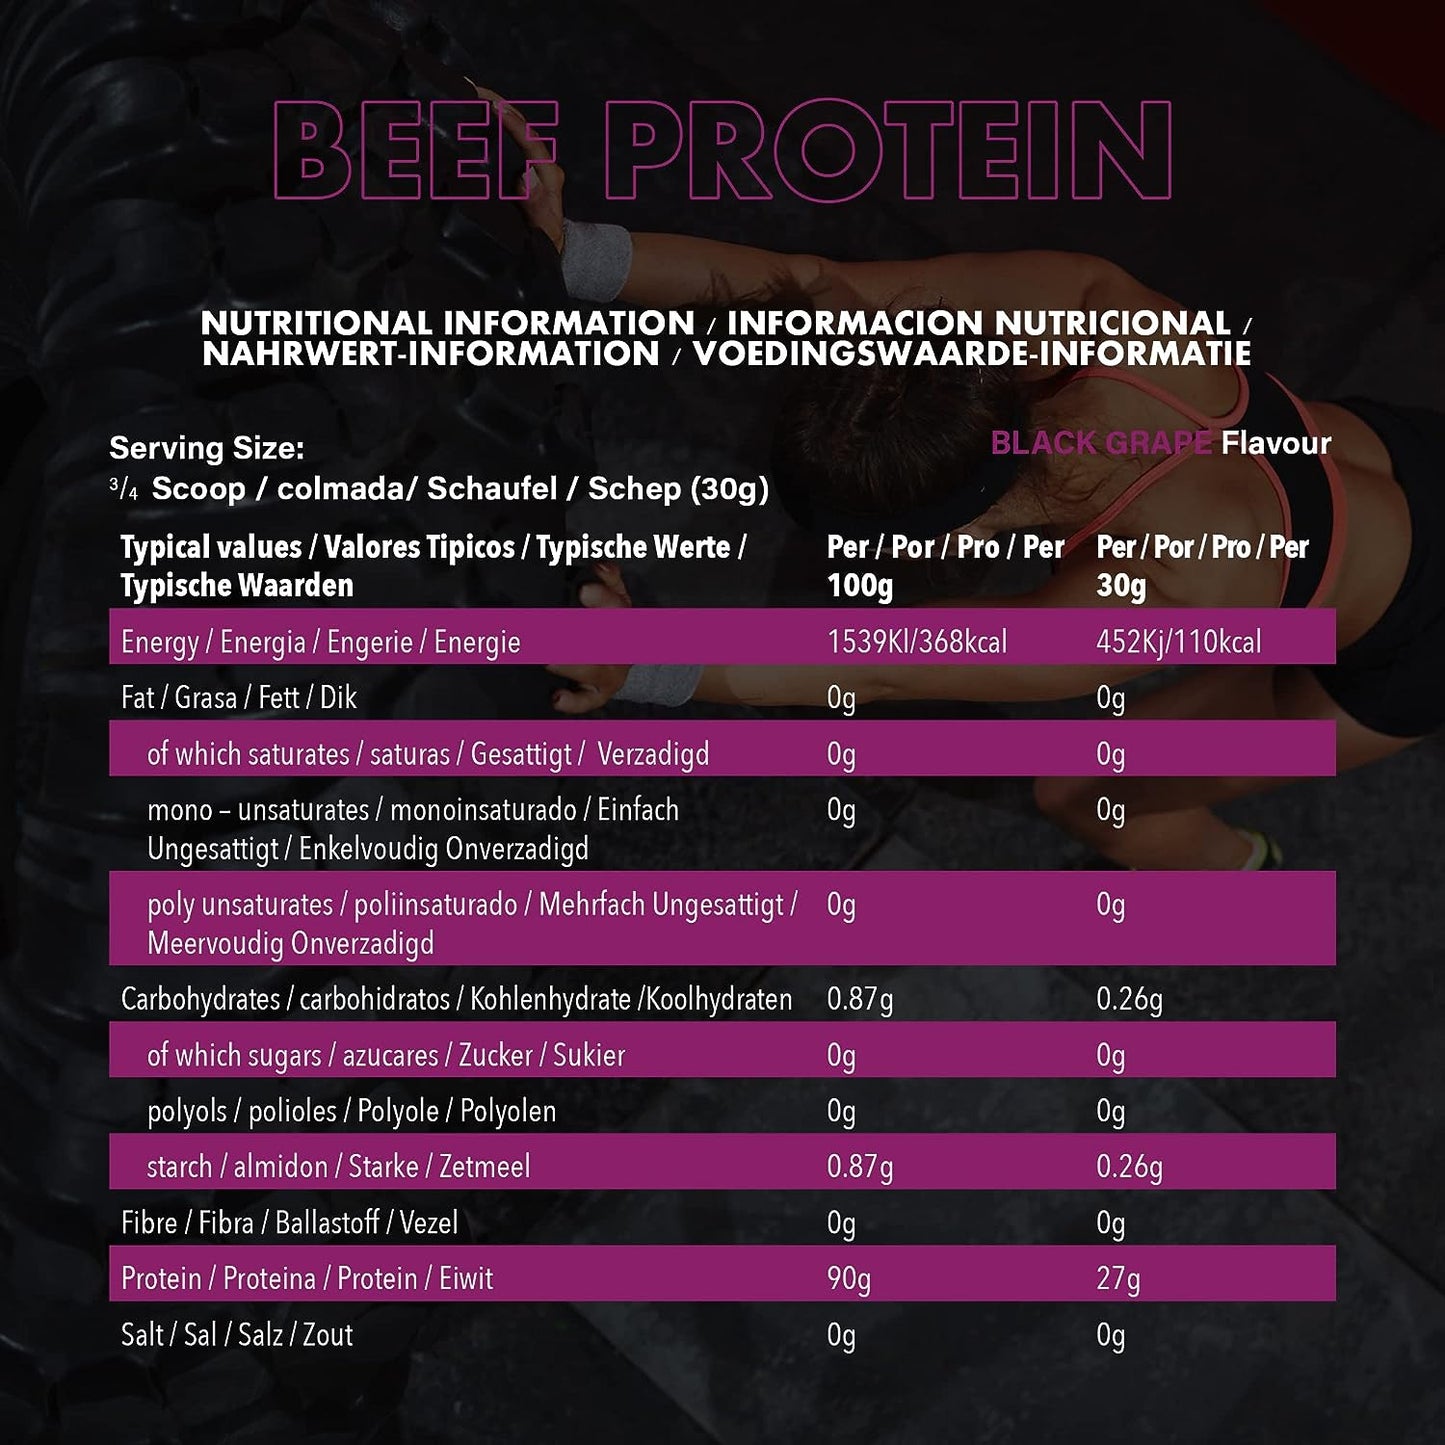 NXT - Beef Protein Isolate Black Grape 1.8 kg